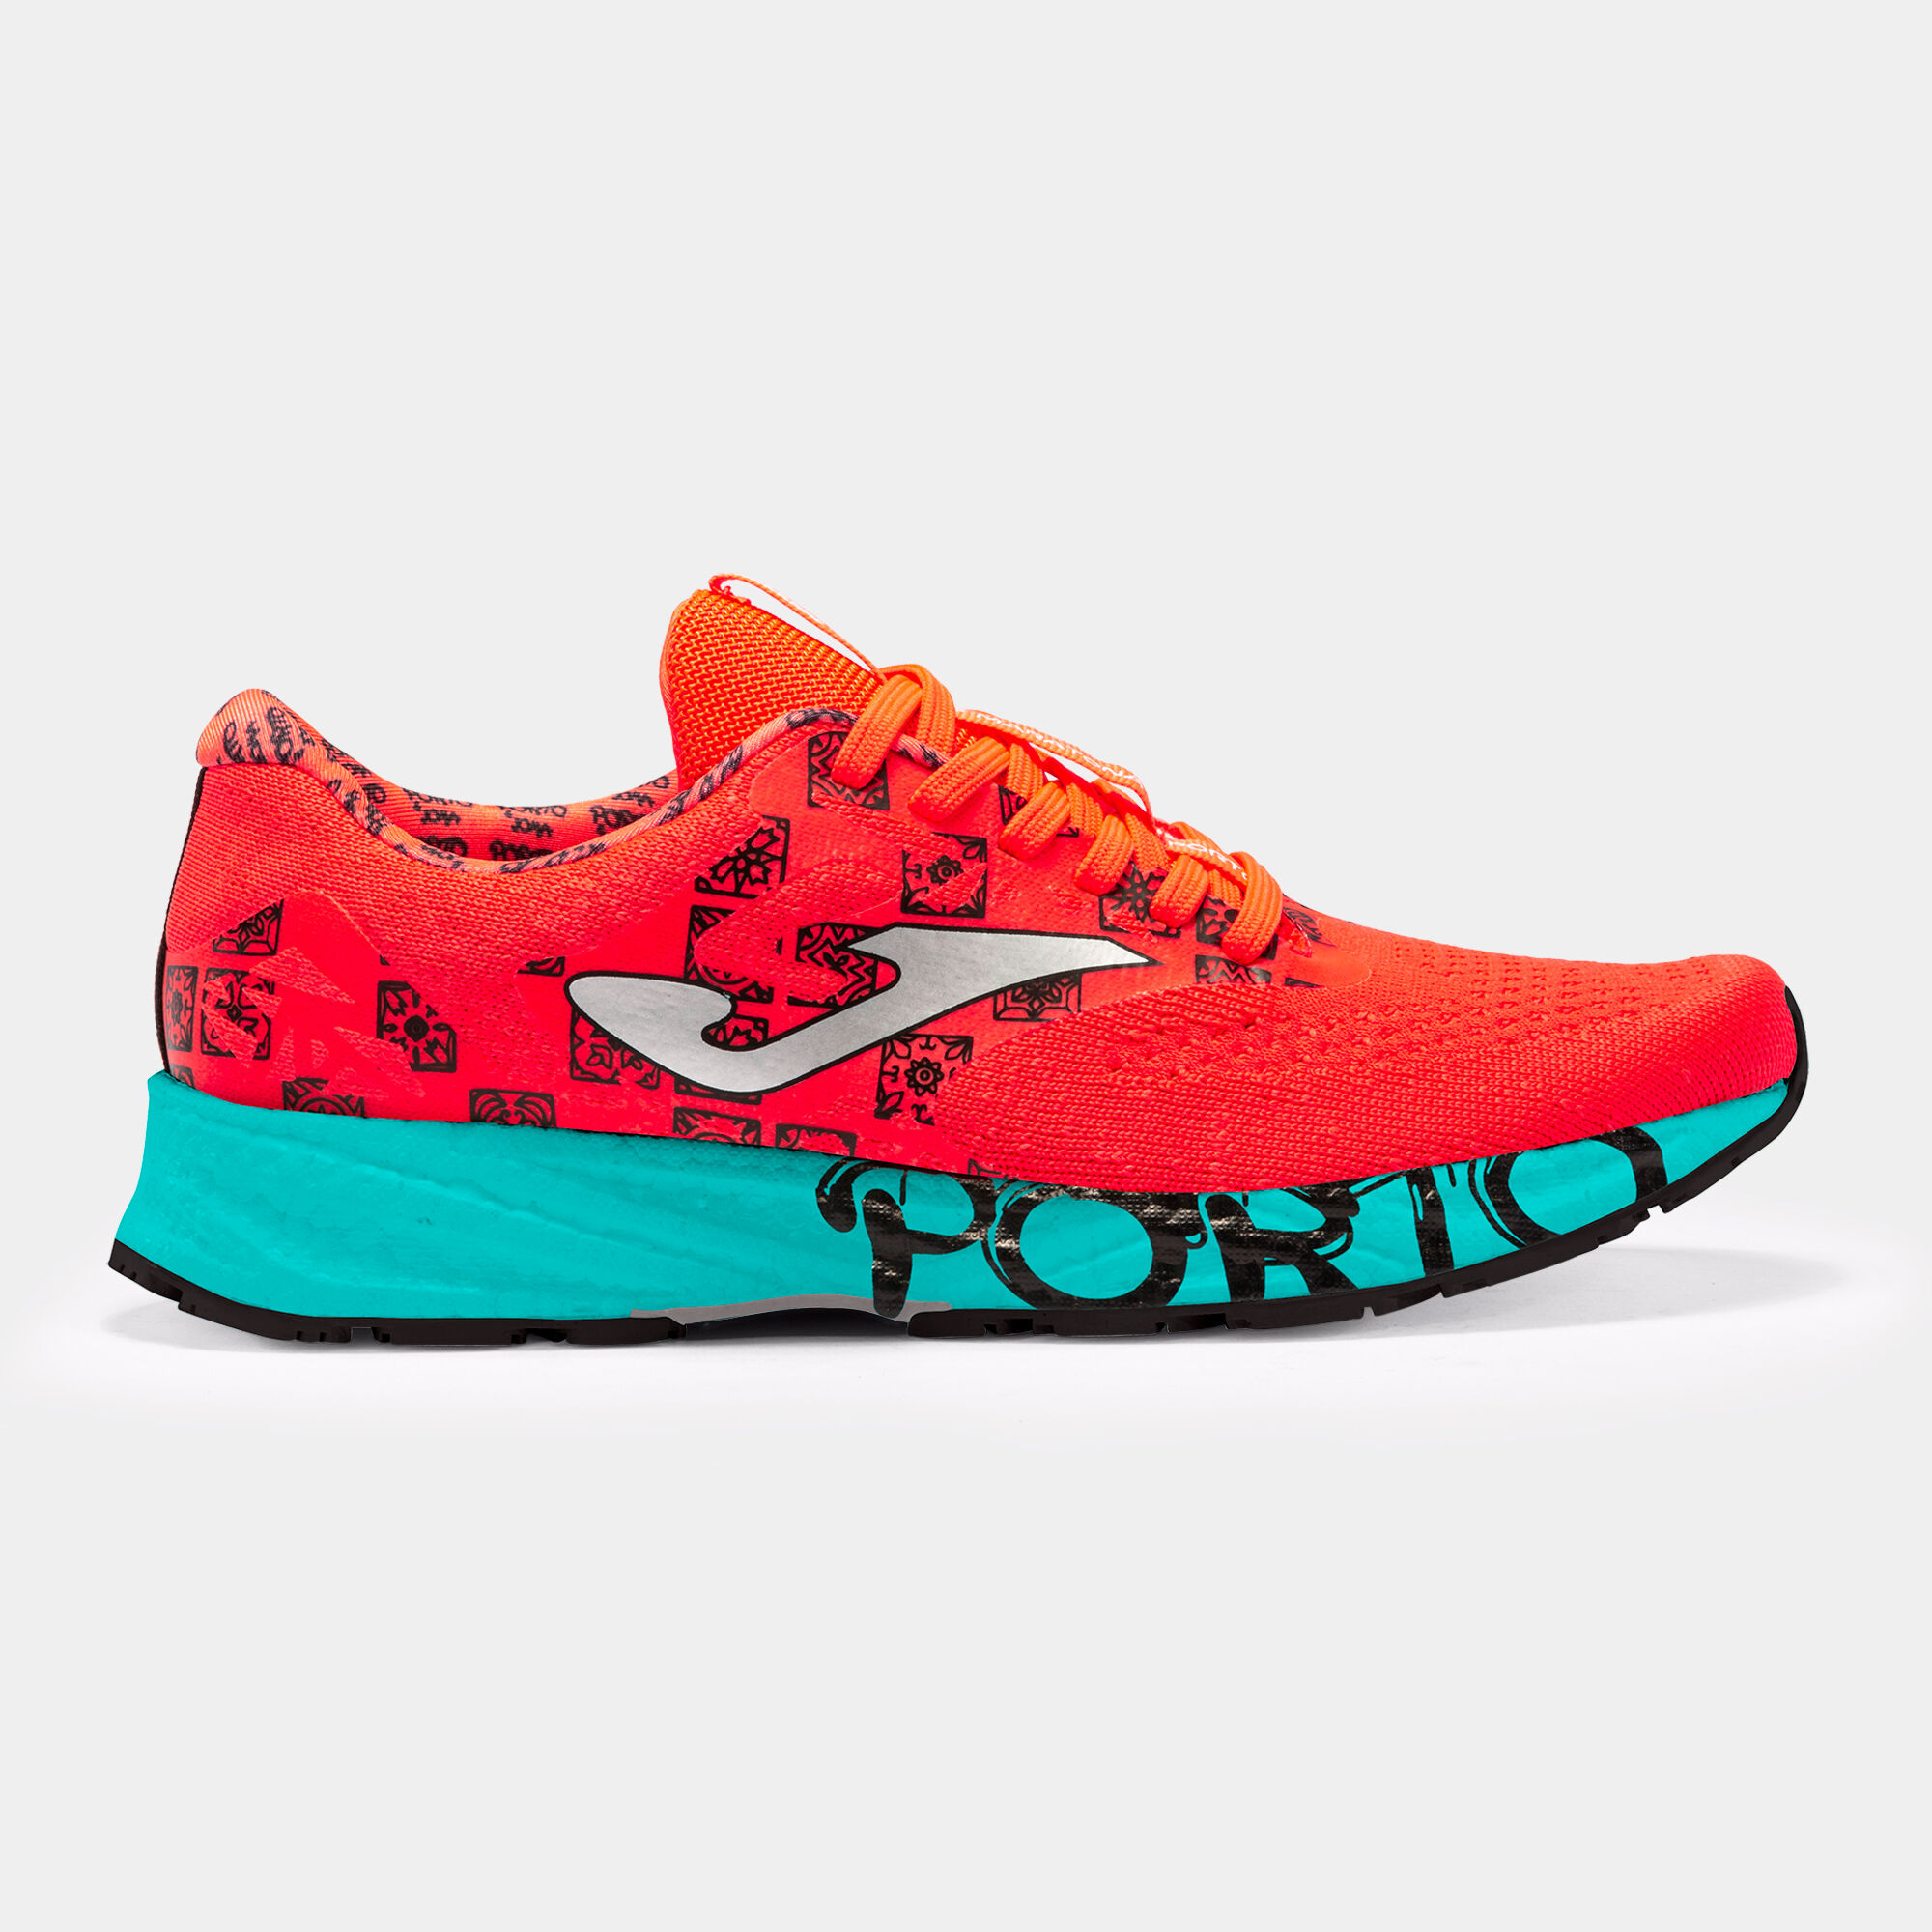 RUNNING SHOES STORM VIPER OPORTO MARATHON WOMAN CORAL TURQUOISE